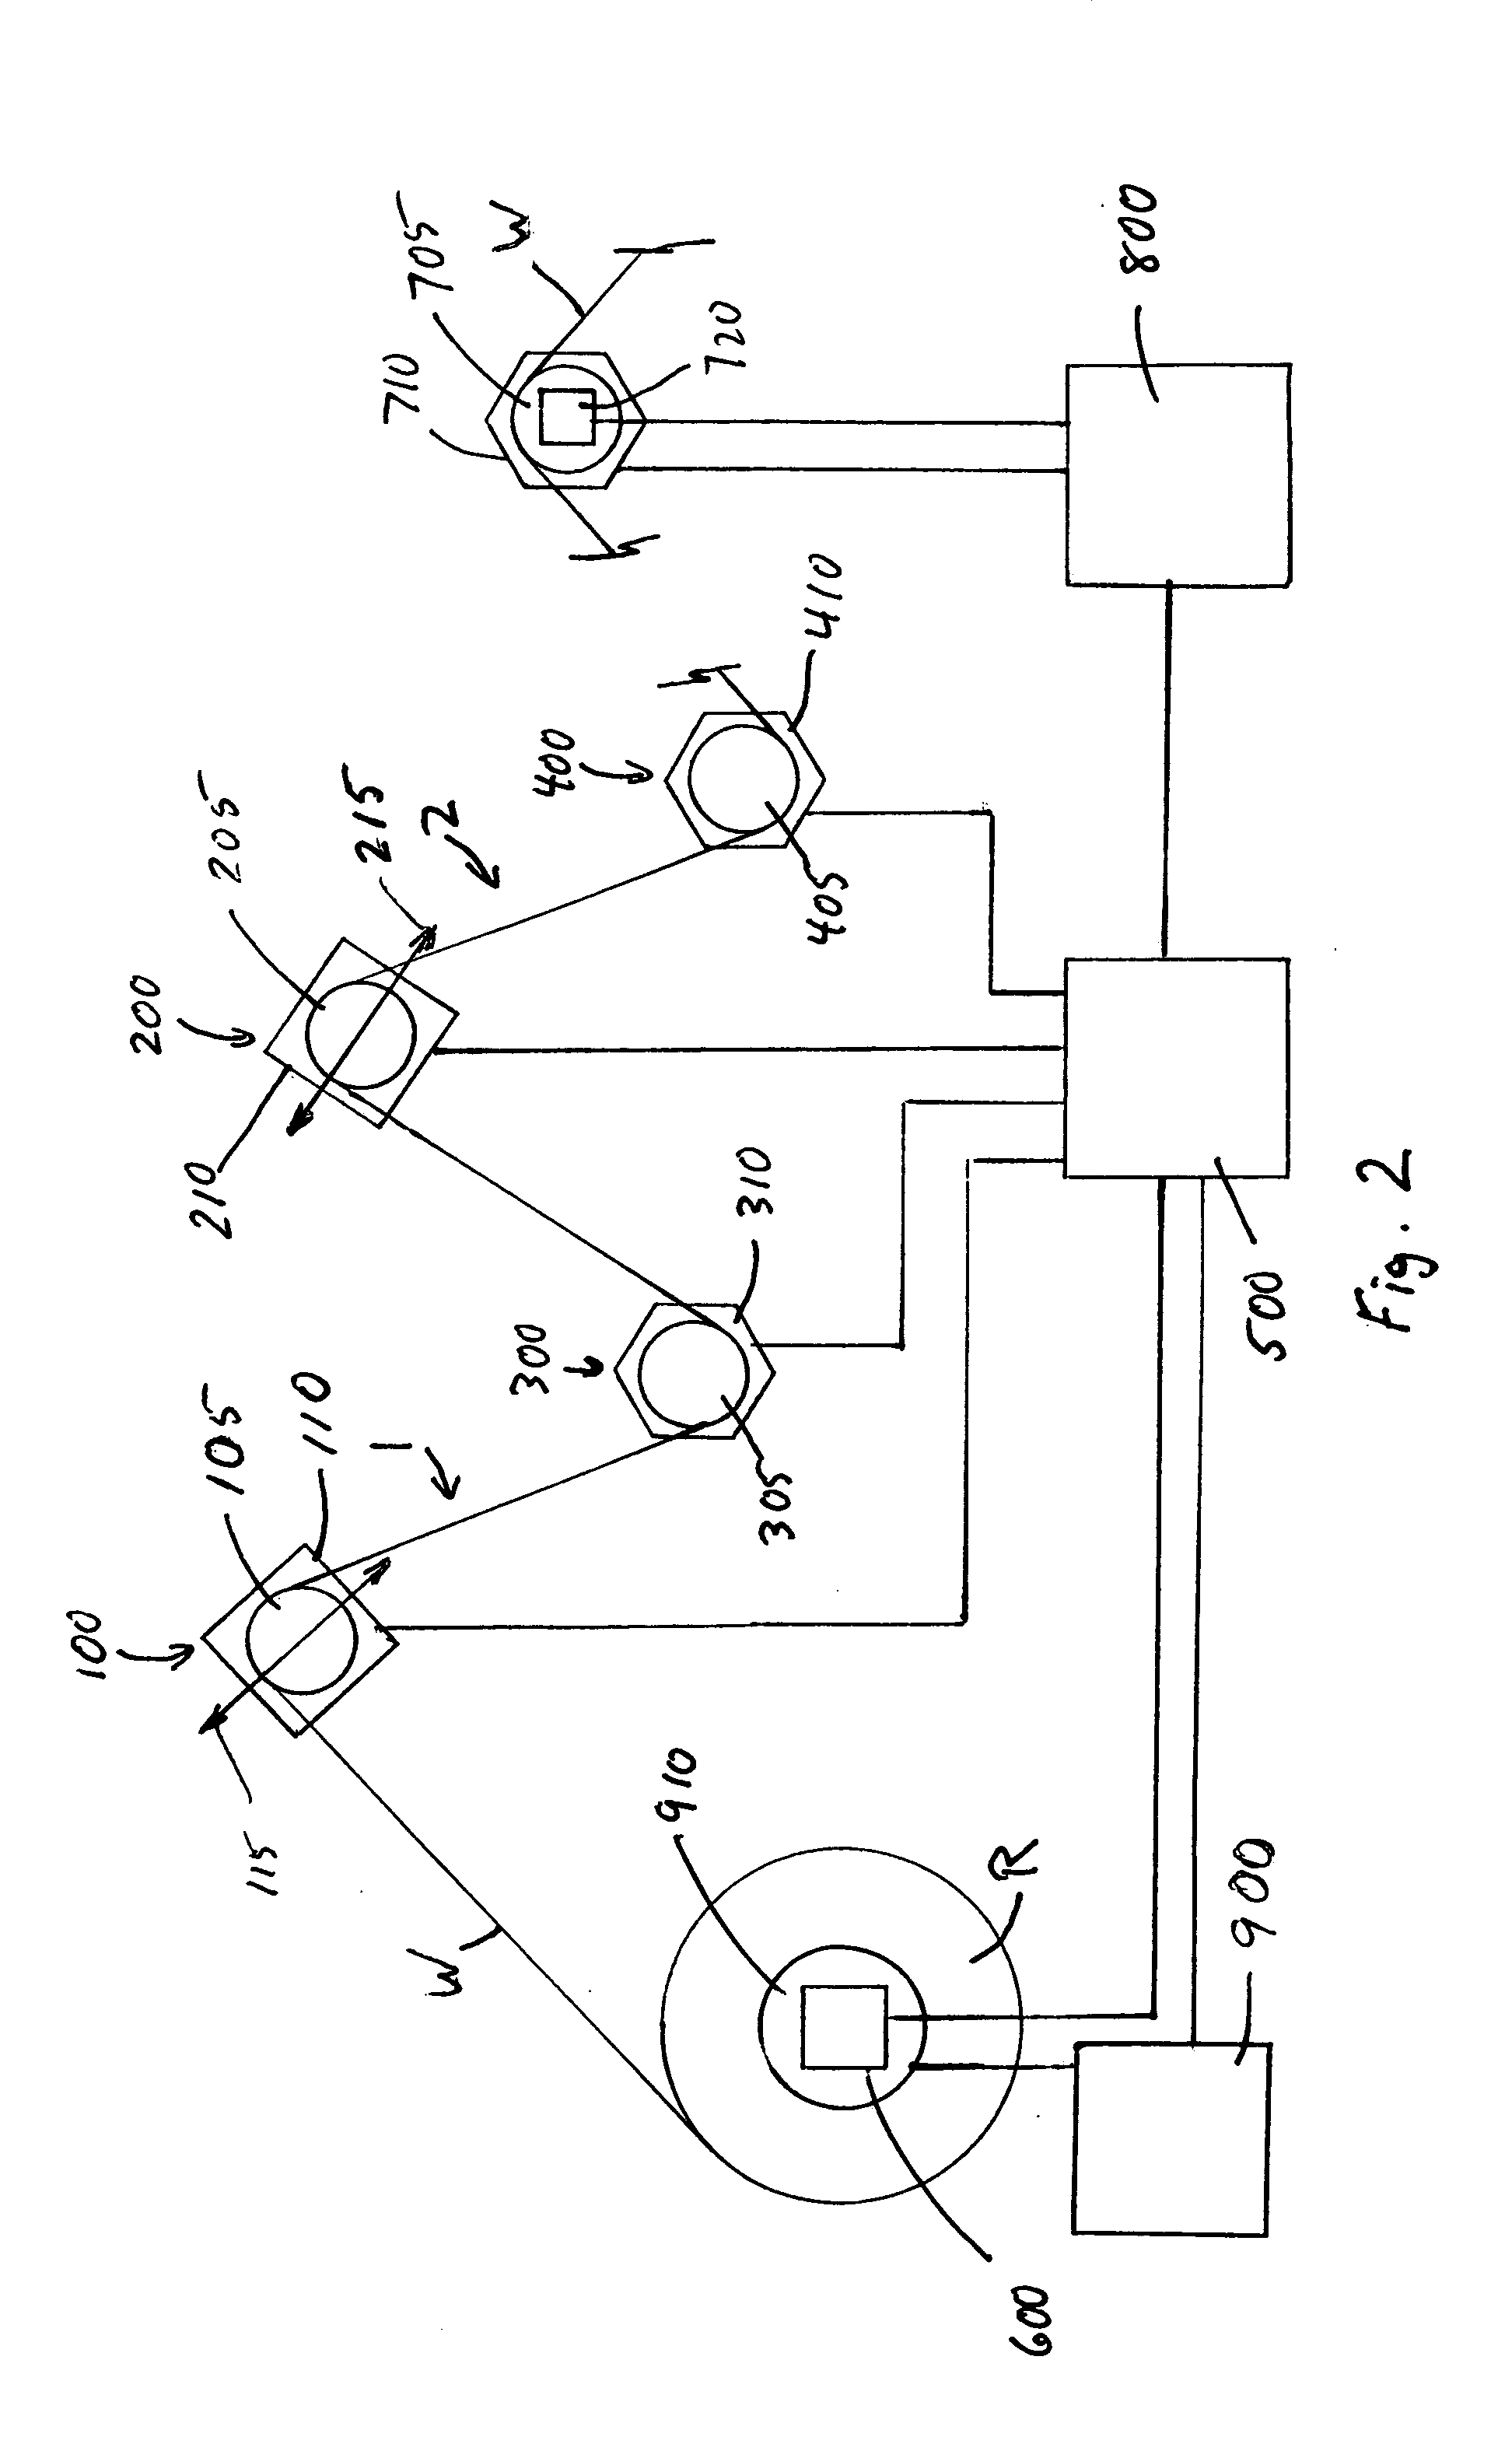 Method of controlling tension in a moving web material